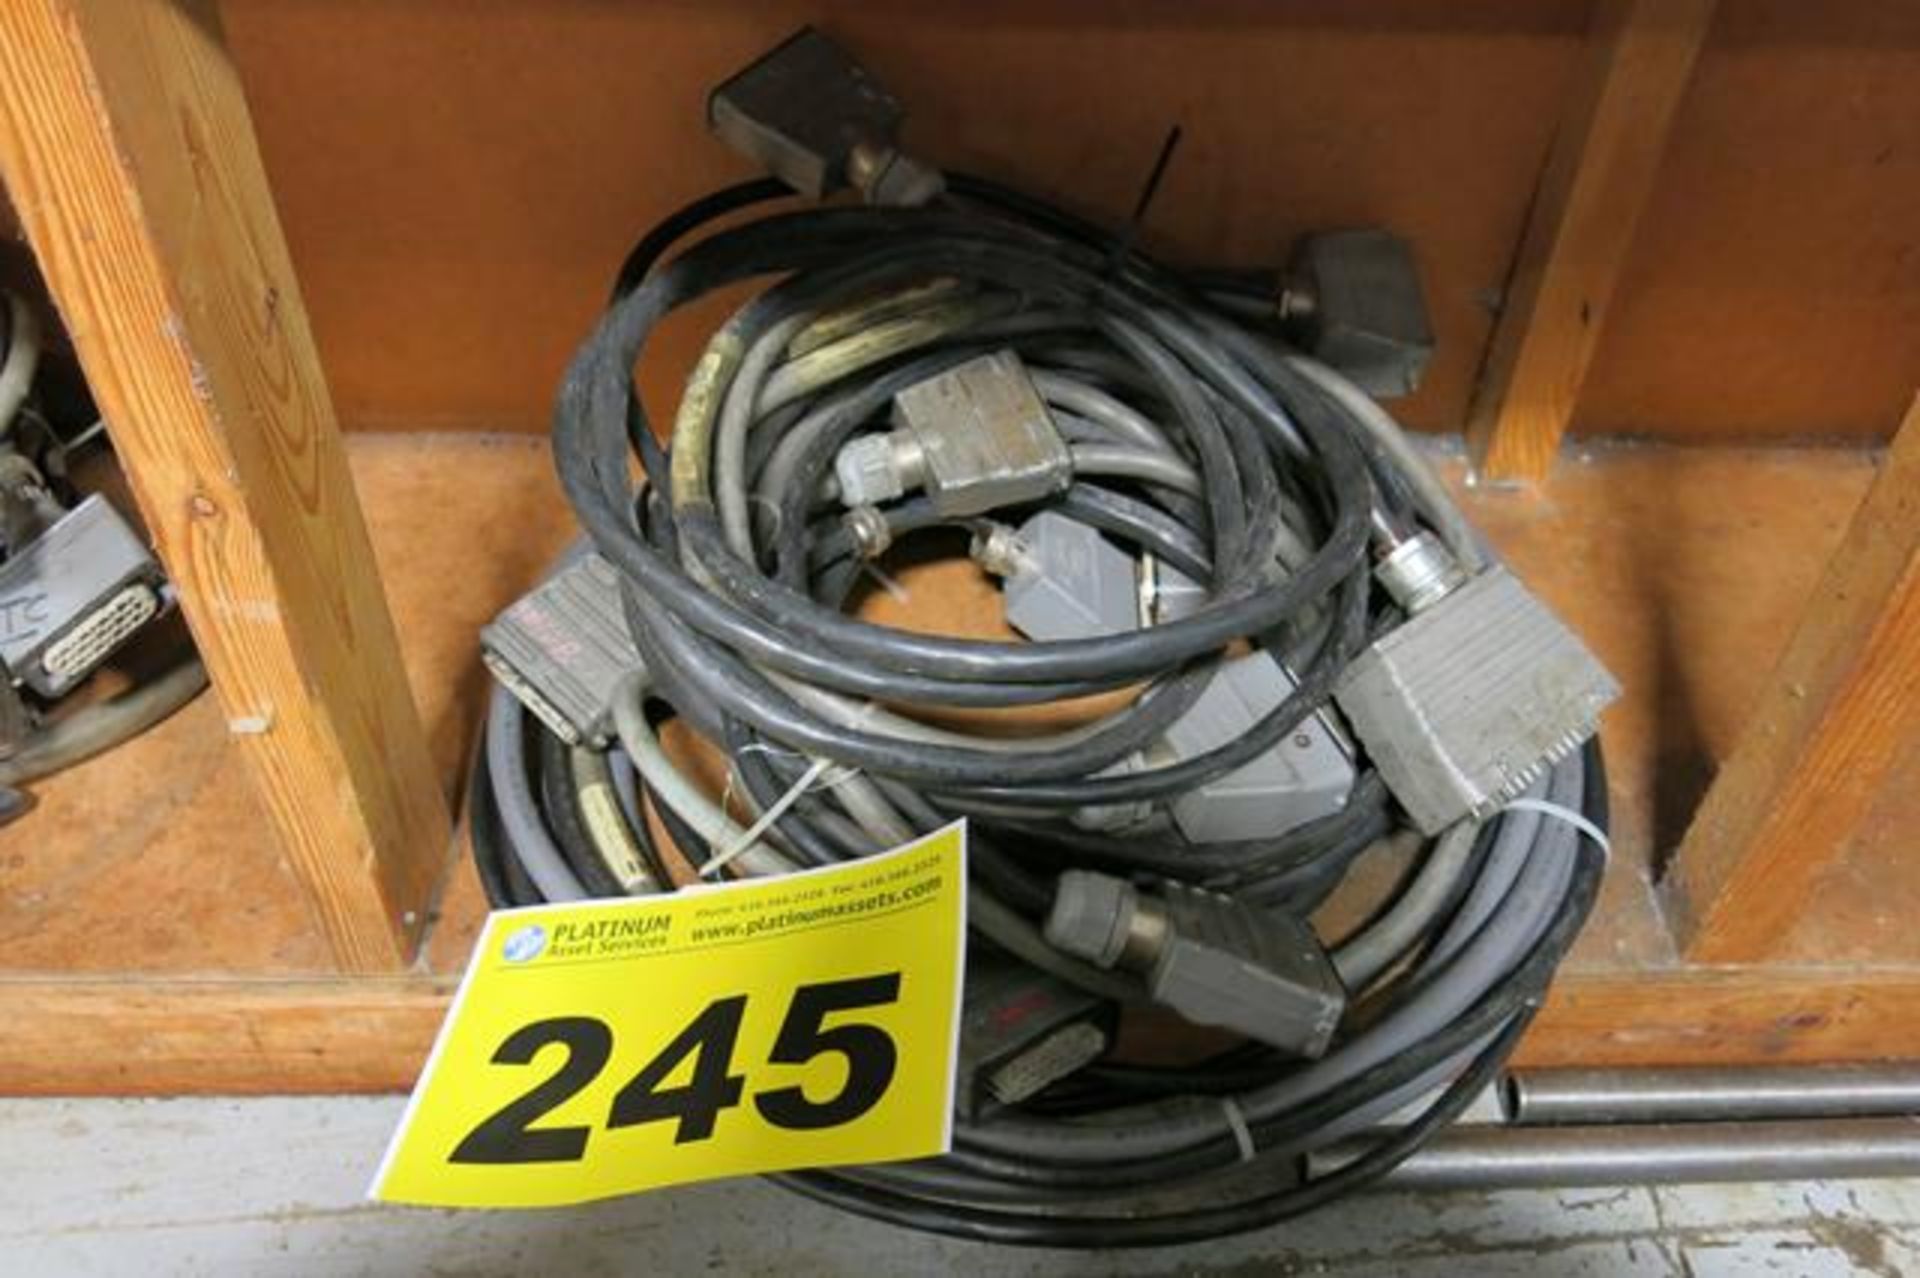 LOT OF HOT RUNNER CABLES